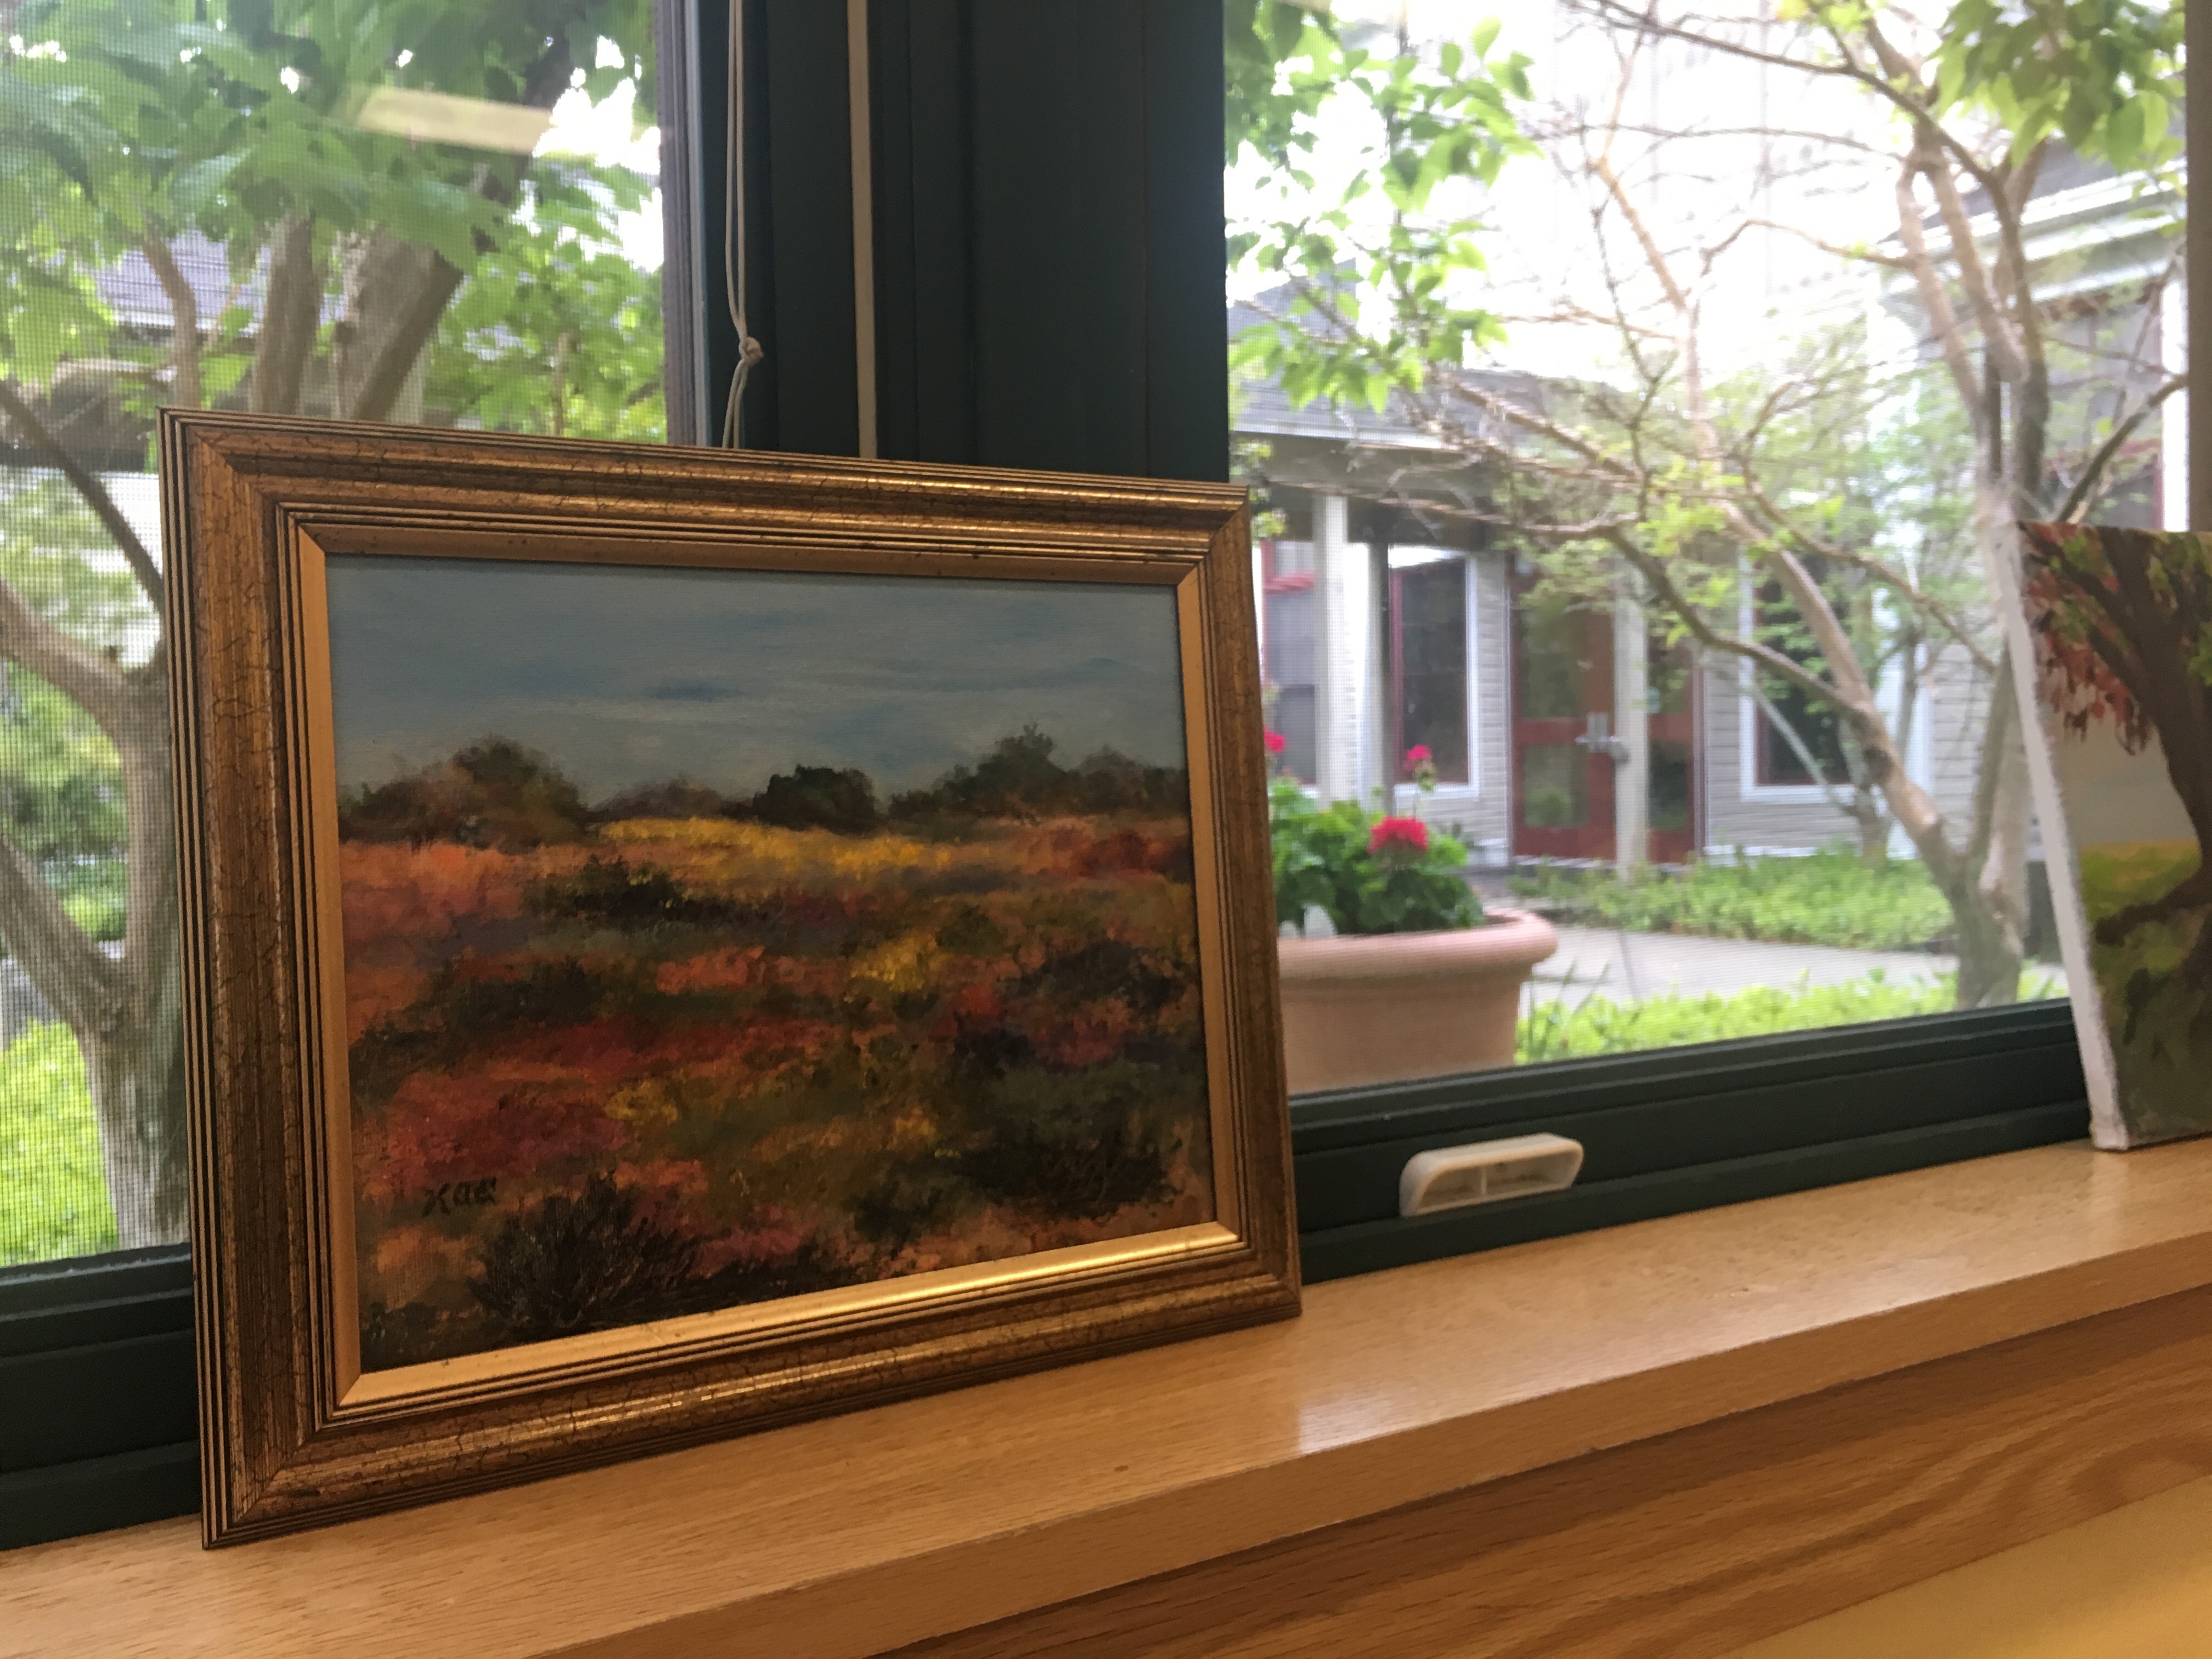 A framed painting sits on a window sill.